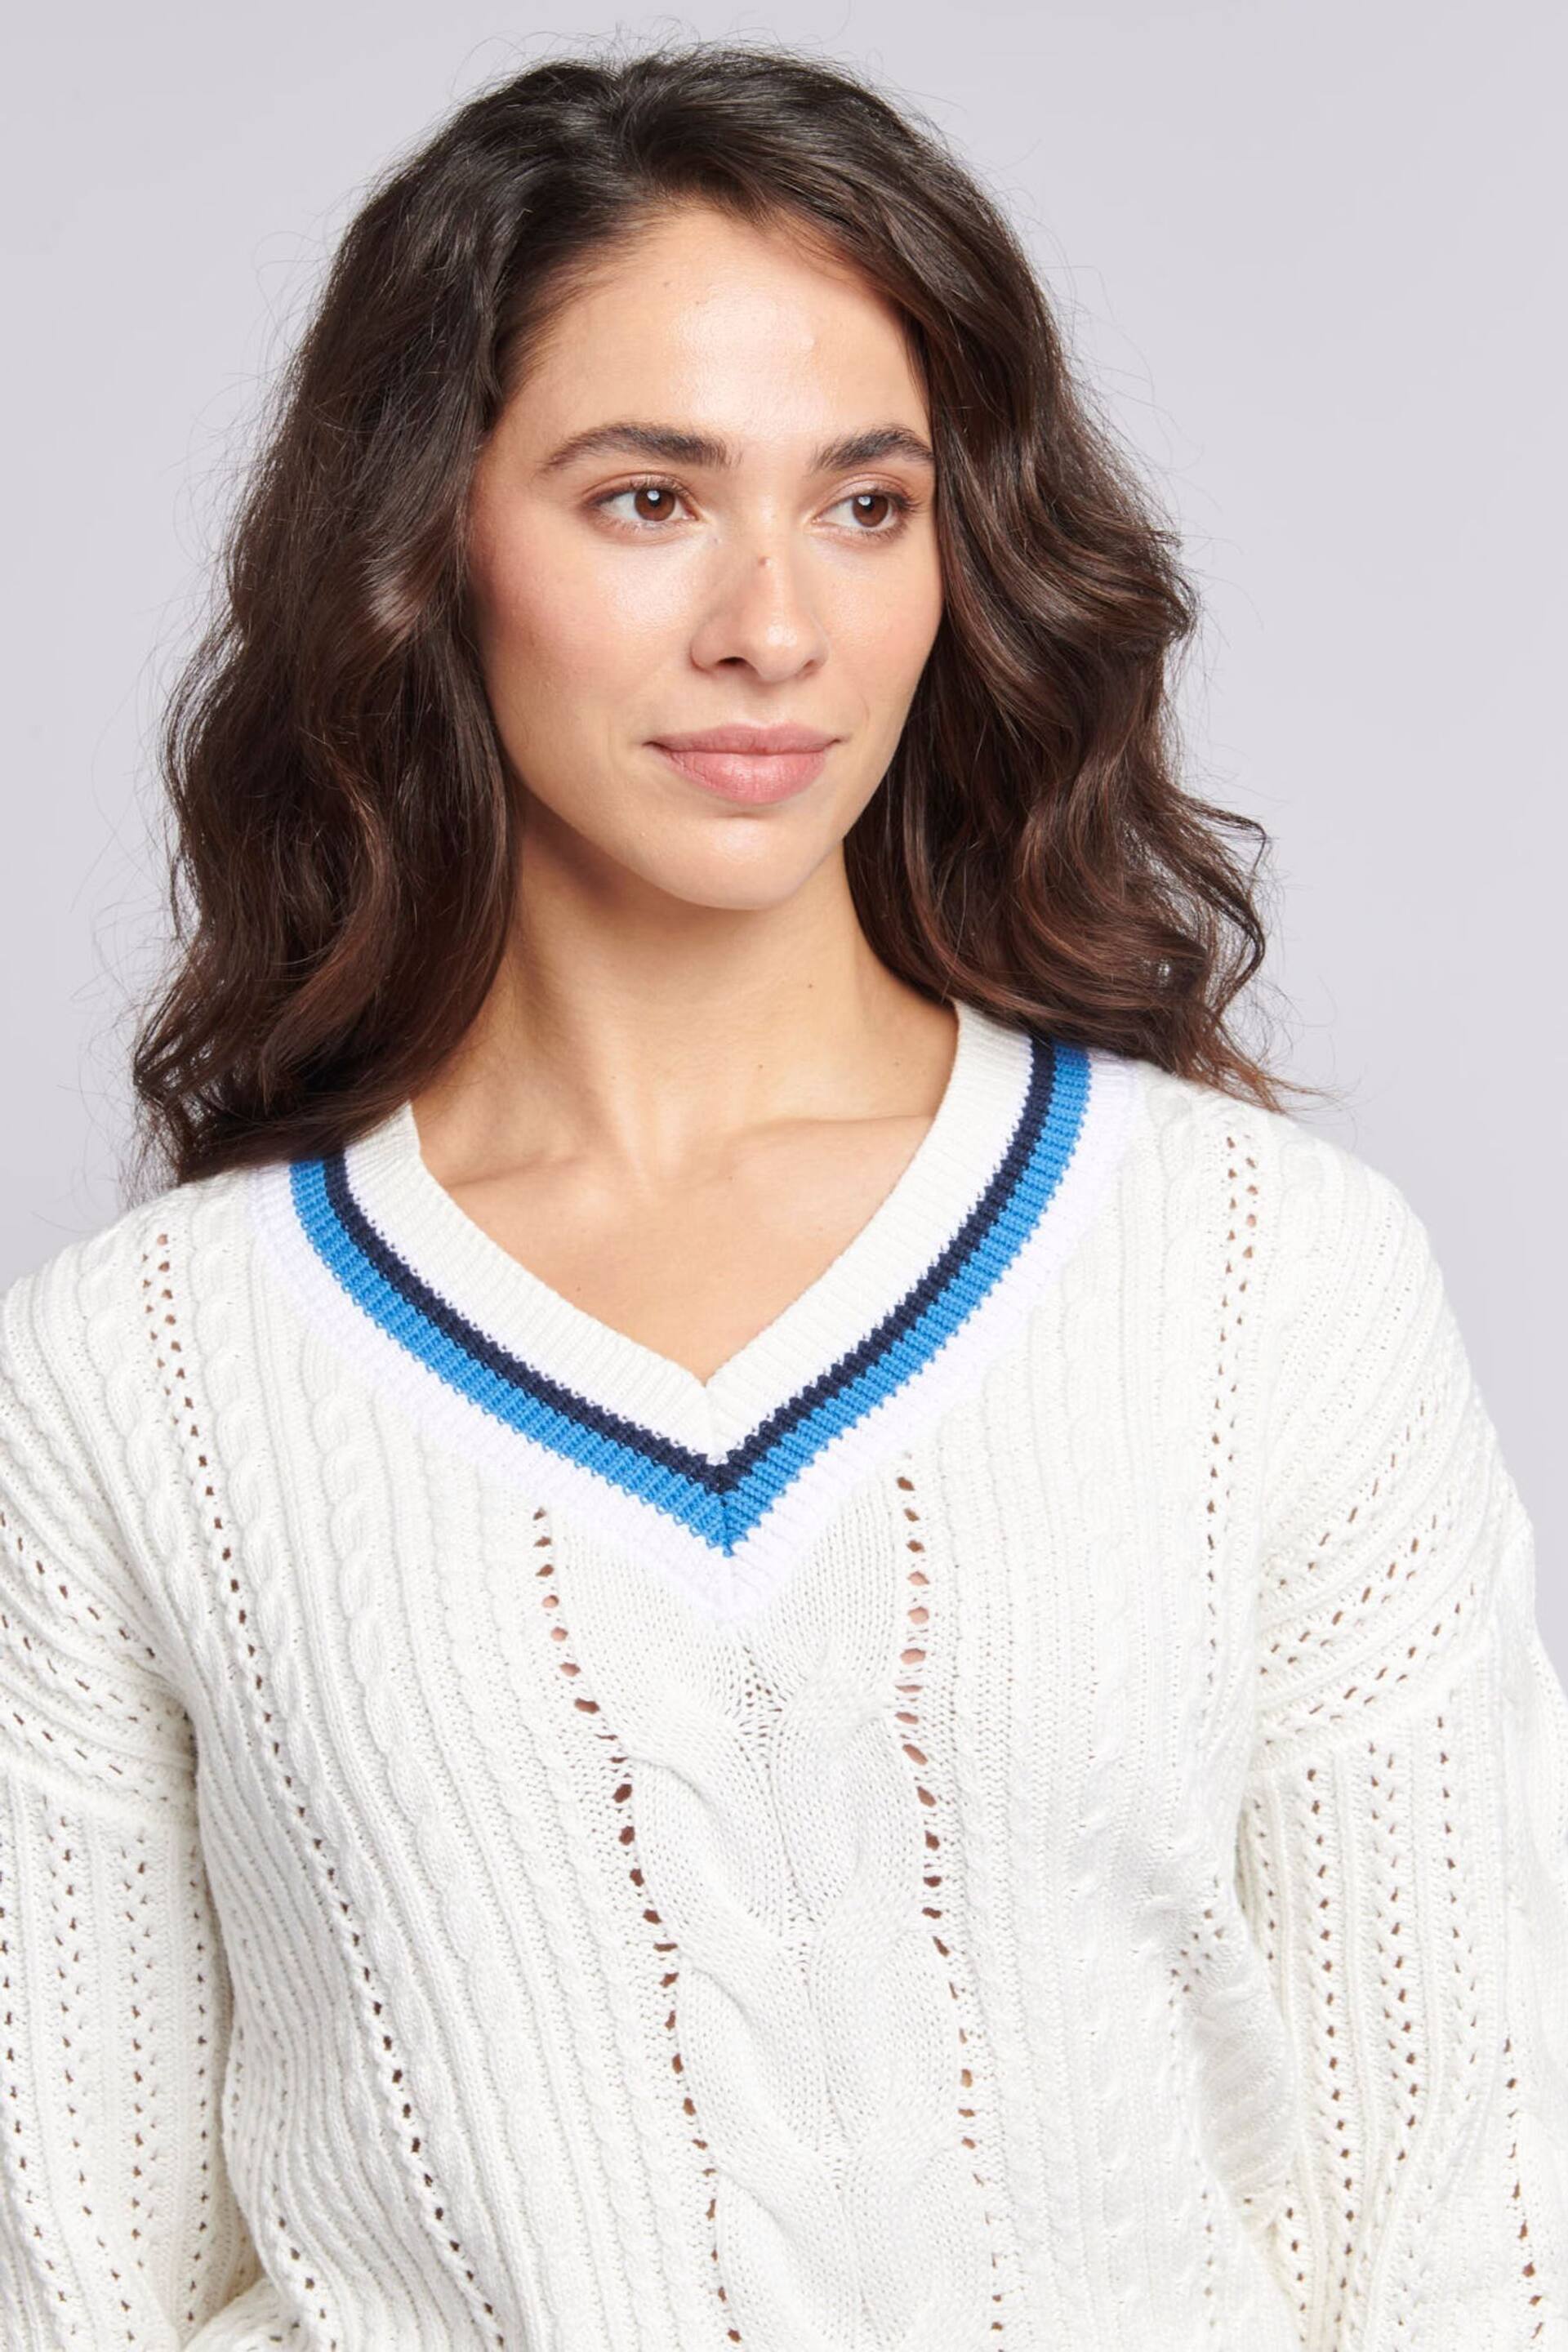 U.S. Polo Assn. Womens Cricket White Jumper - Image 4 of 8